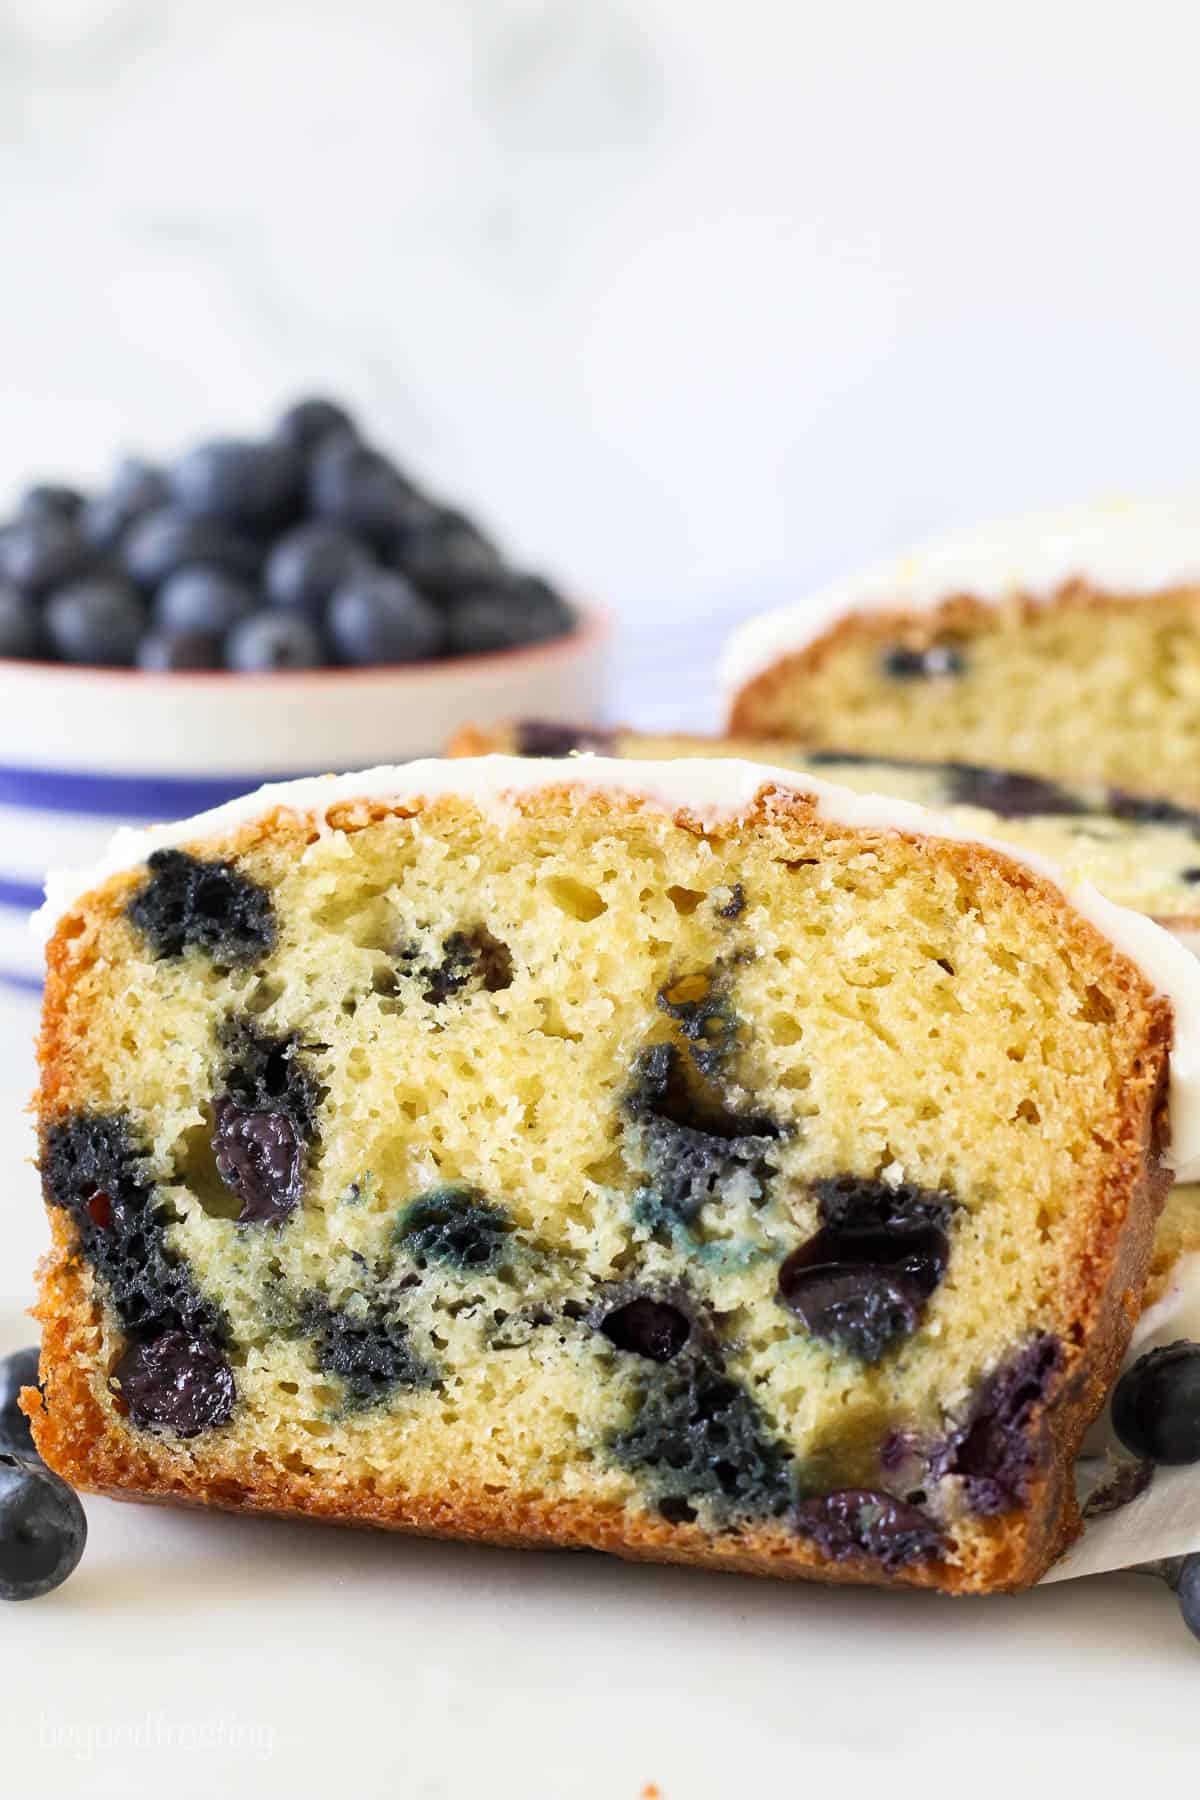 Sliced lemon bread with blueberries and glaze